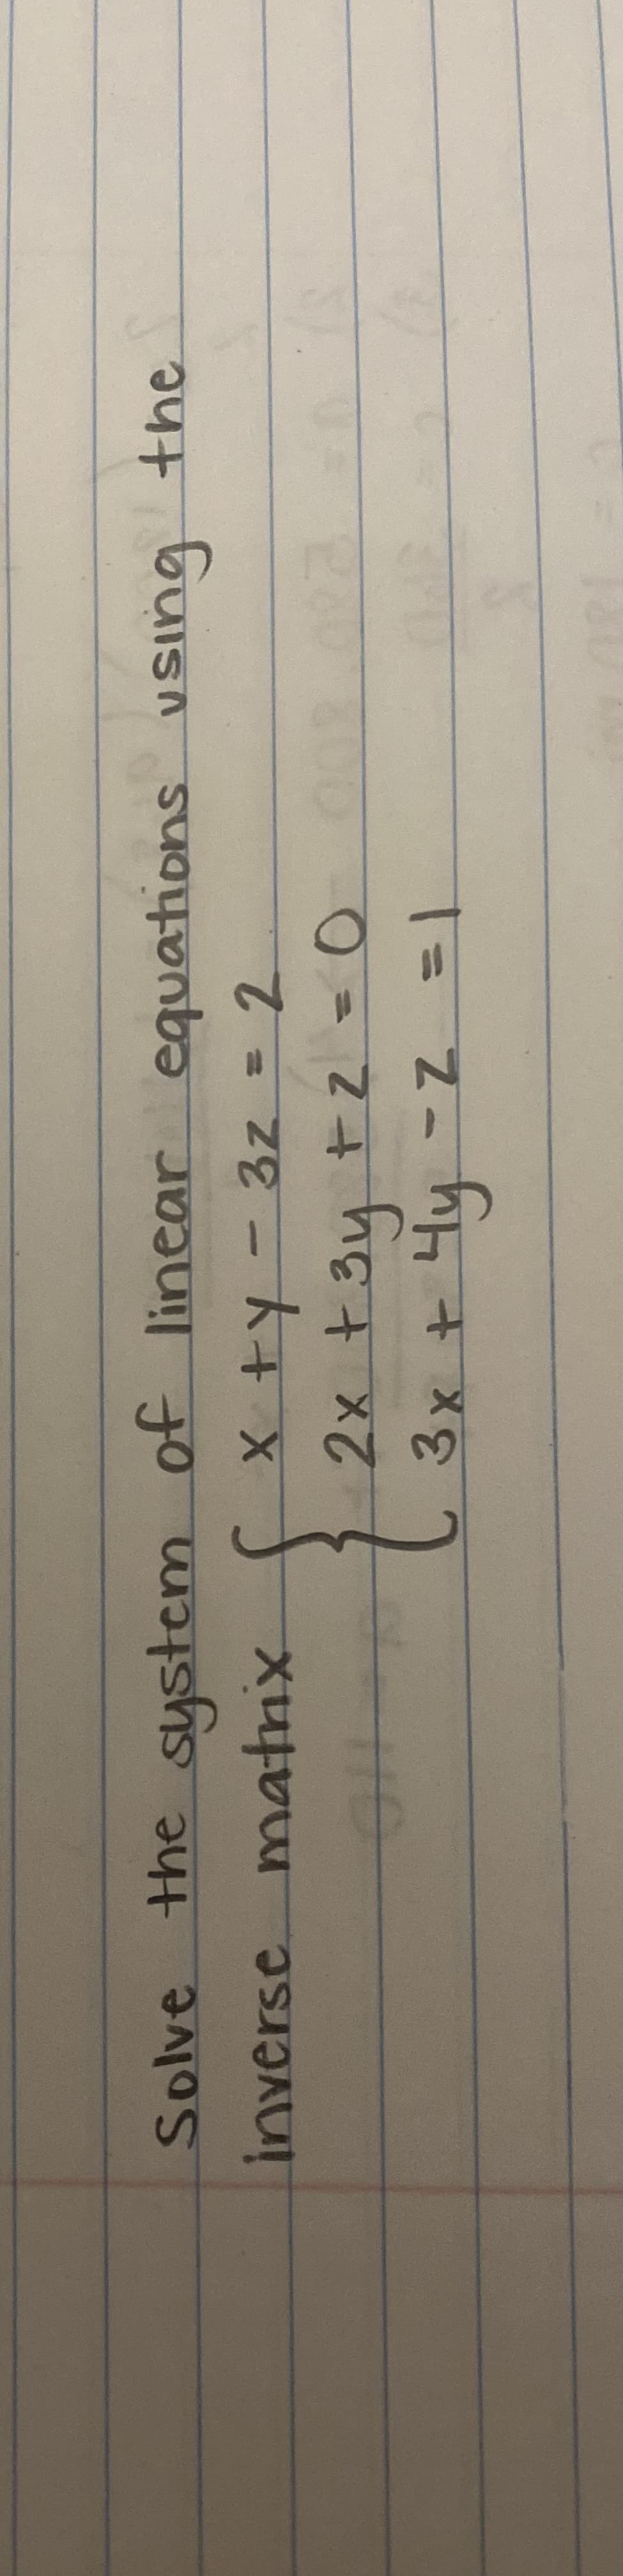 Solve the system
inverse matrix
of linear equations
x +y = 3z = 2
2x + 3y + 2 = 0
3x + 4y = 2 = 1
using
using the